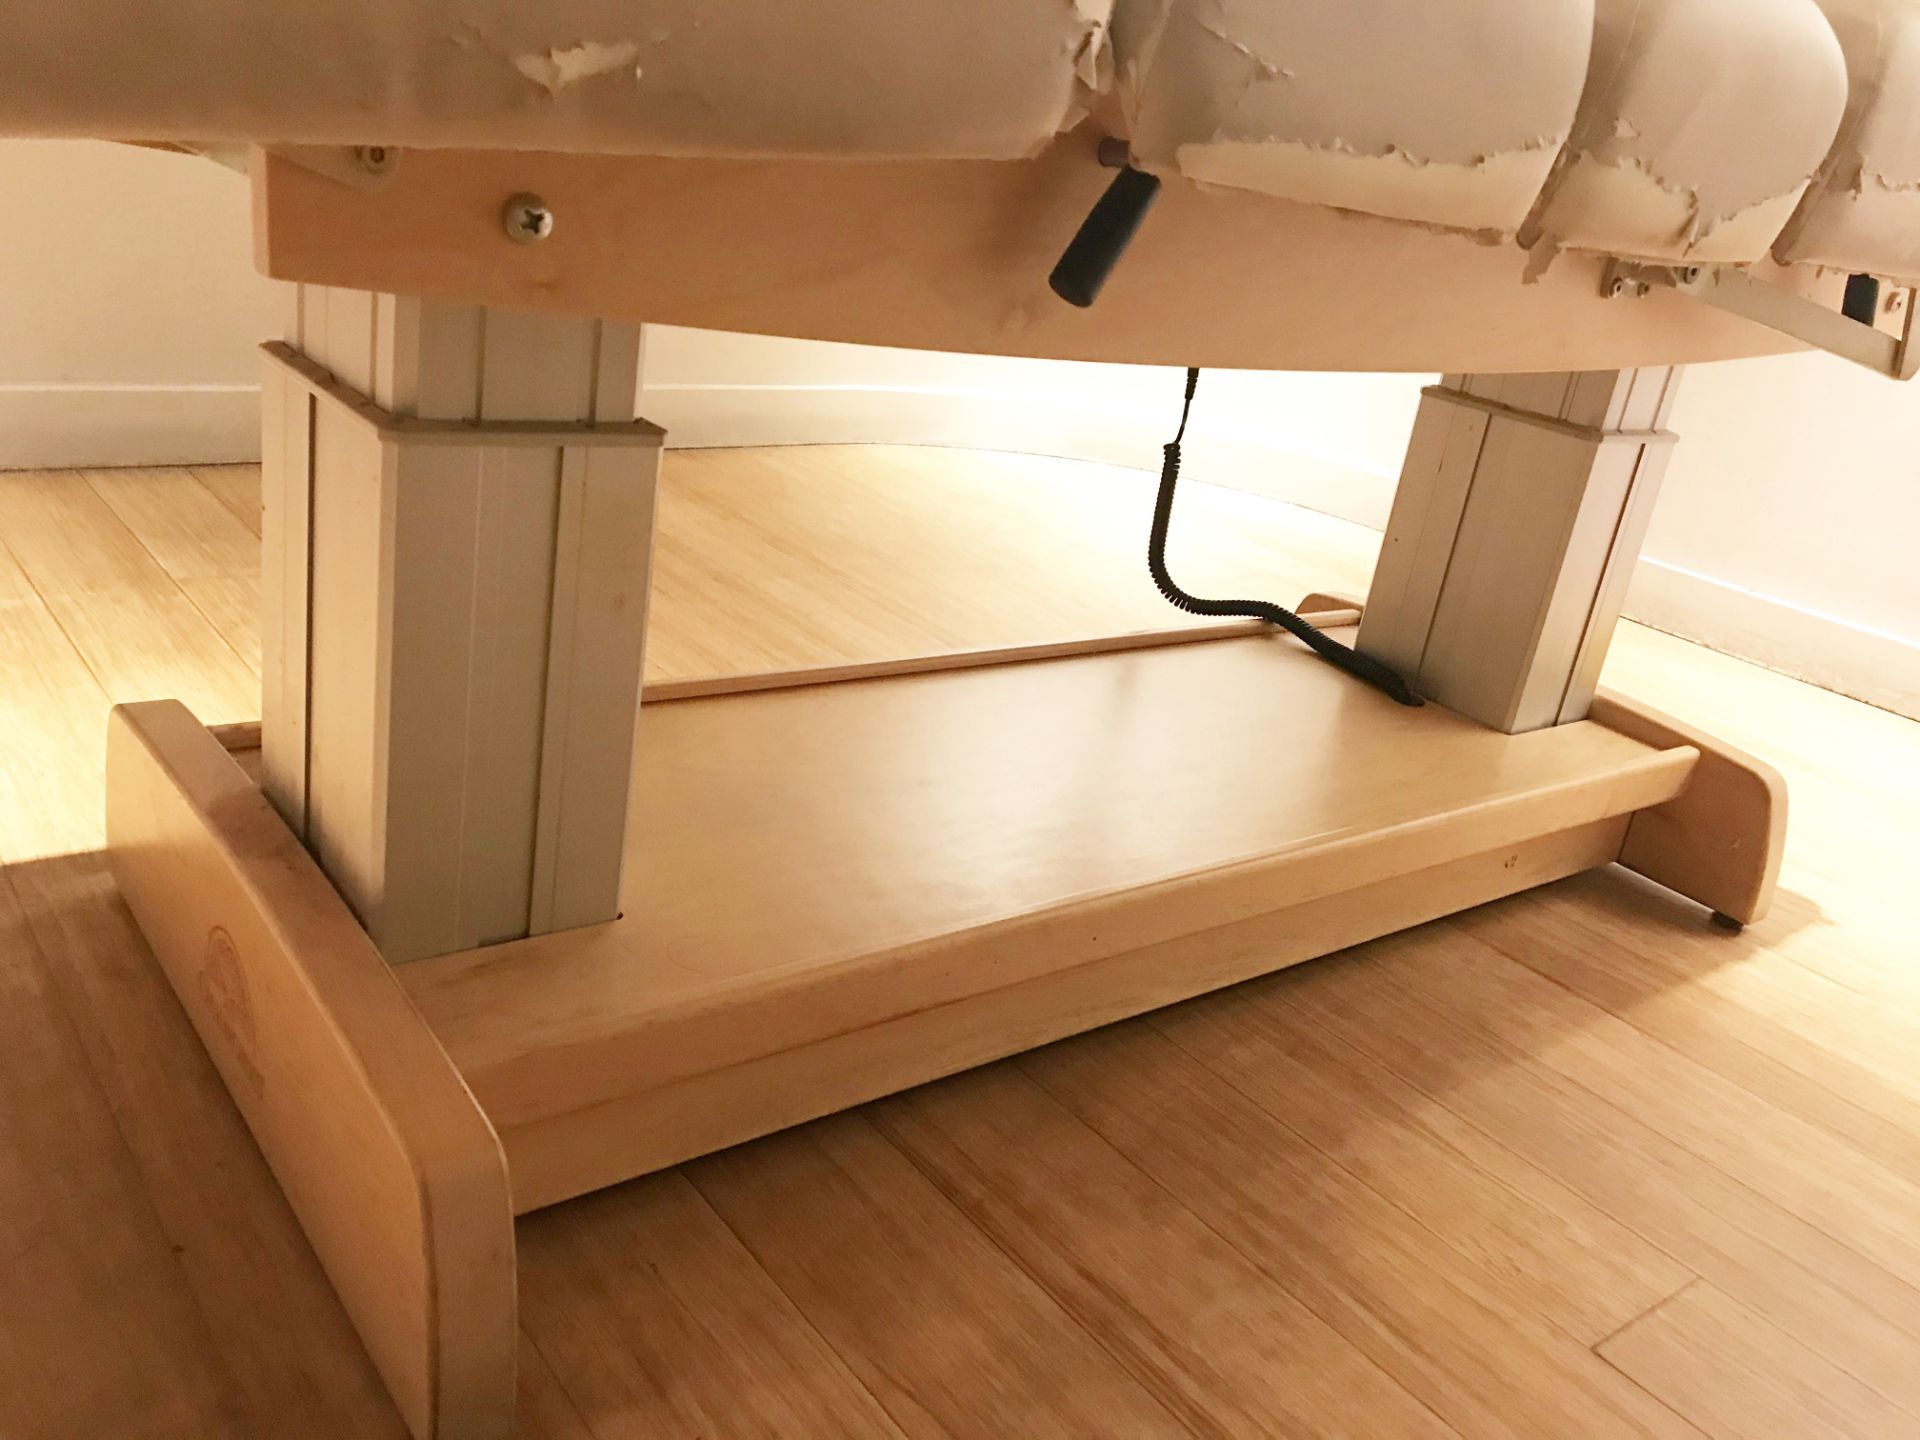 2 x Oakworks Clinician Electric-Hydraulic Massage Tables With Footpedals and Linak HBWO Remote - Image 3 of 8